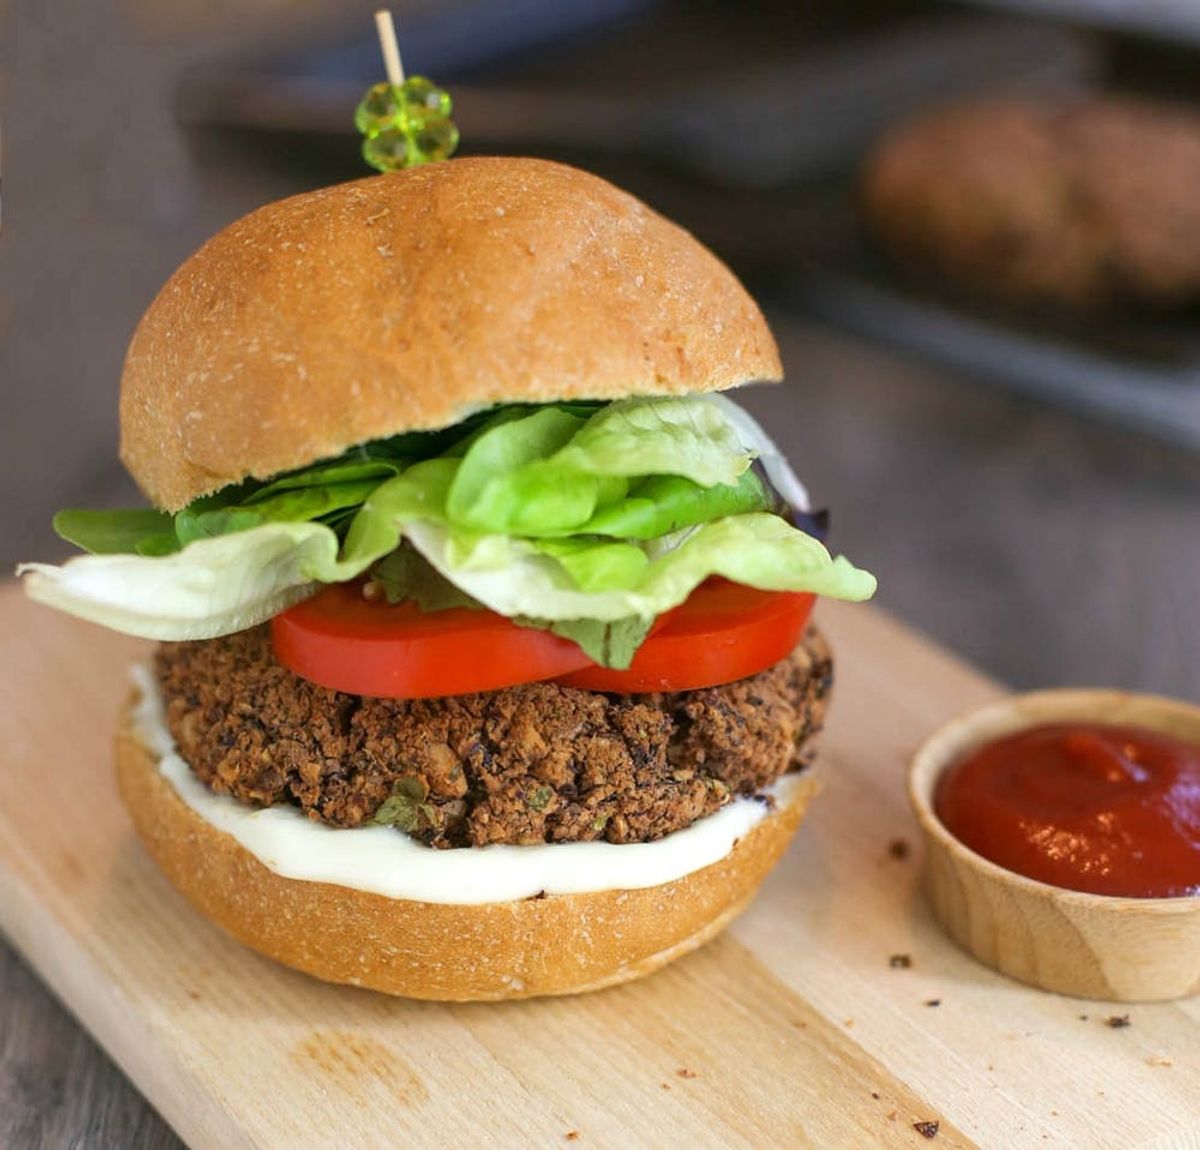 How to Make Veggie Burgers for Your Super Bowl Party